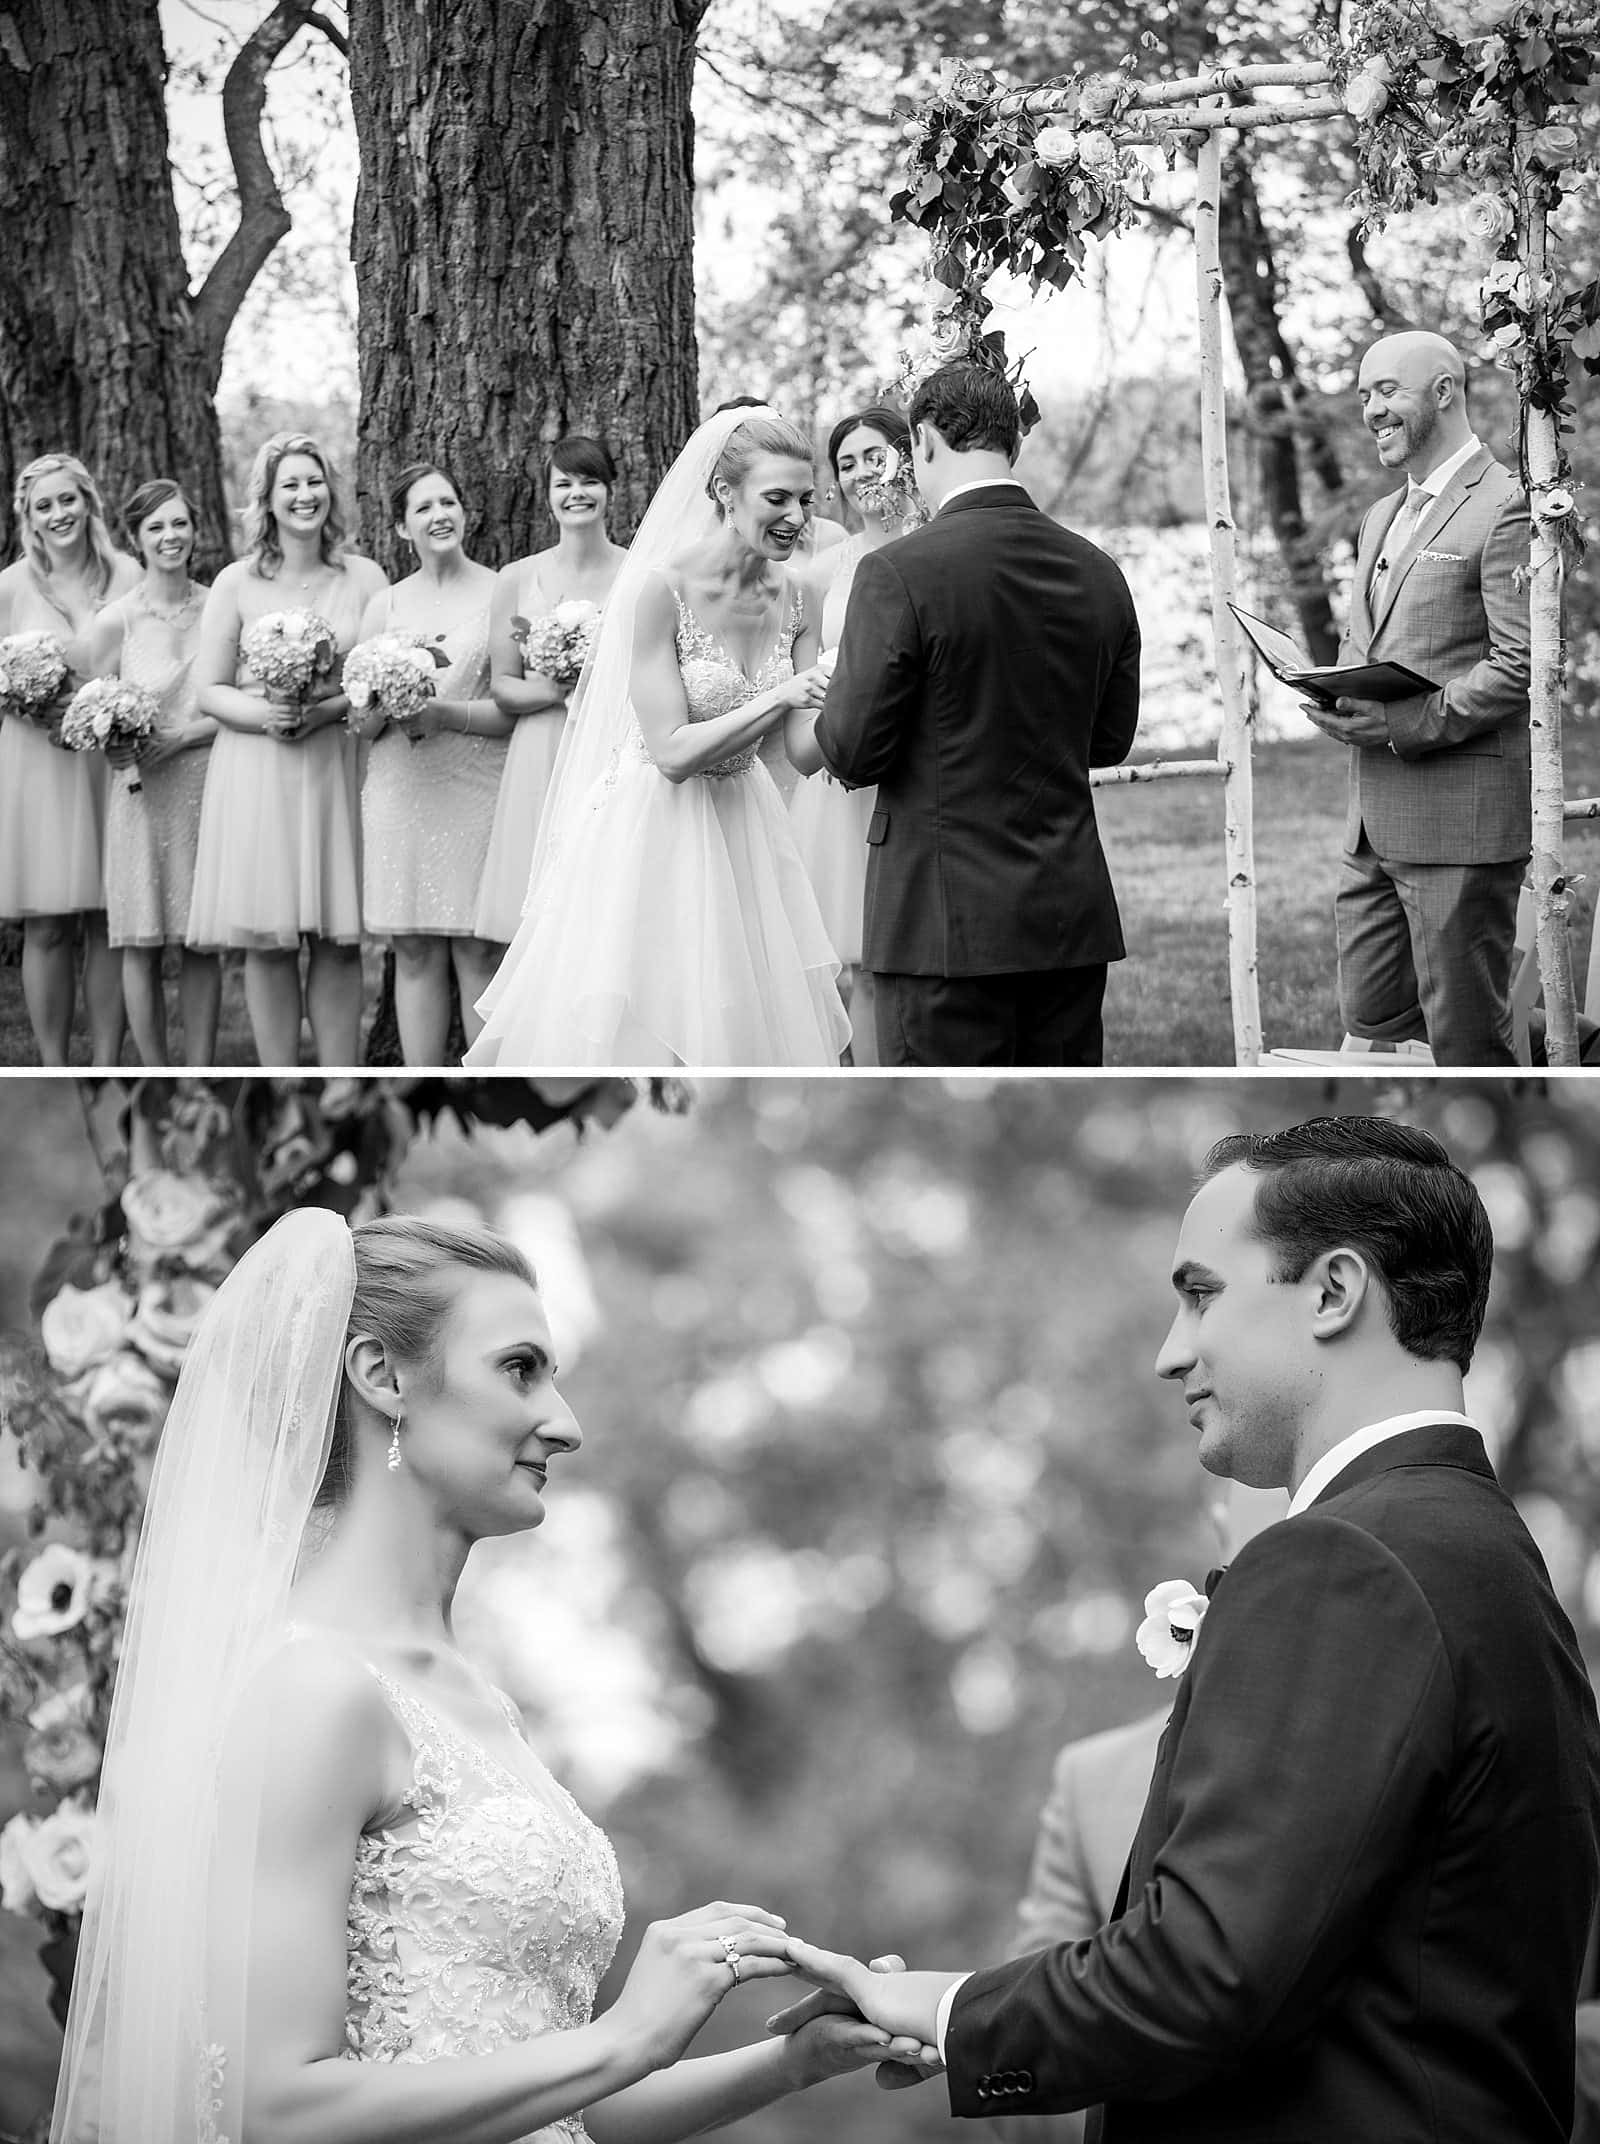 Black and white wedding ceremony, bride and groom exchanging rings